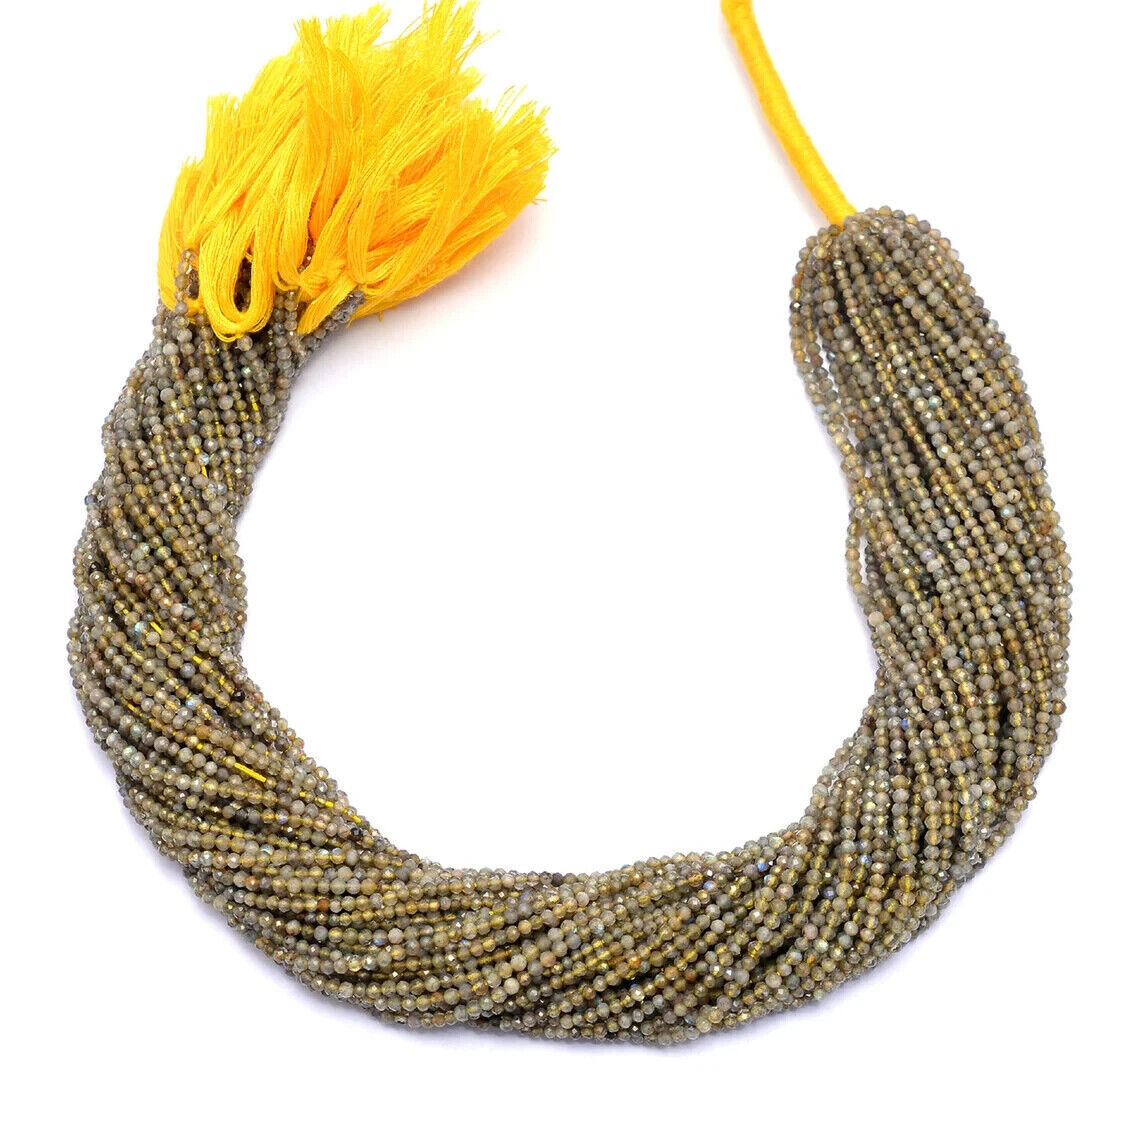 Natural AAA Yellow Labradorite 2mm-2.5m Faceted Rondella Beads 33cm 1 Strand